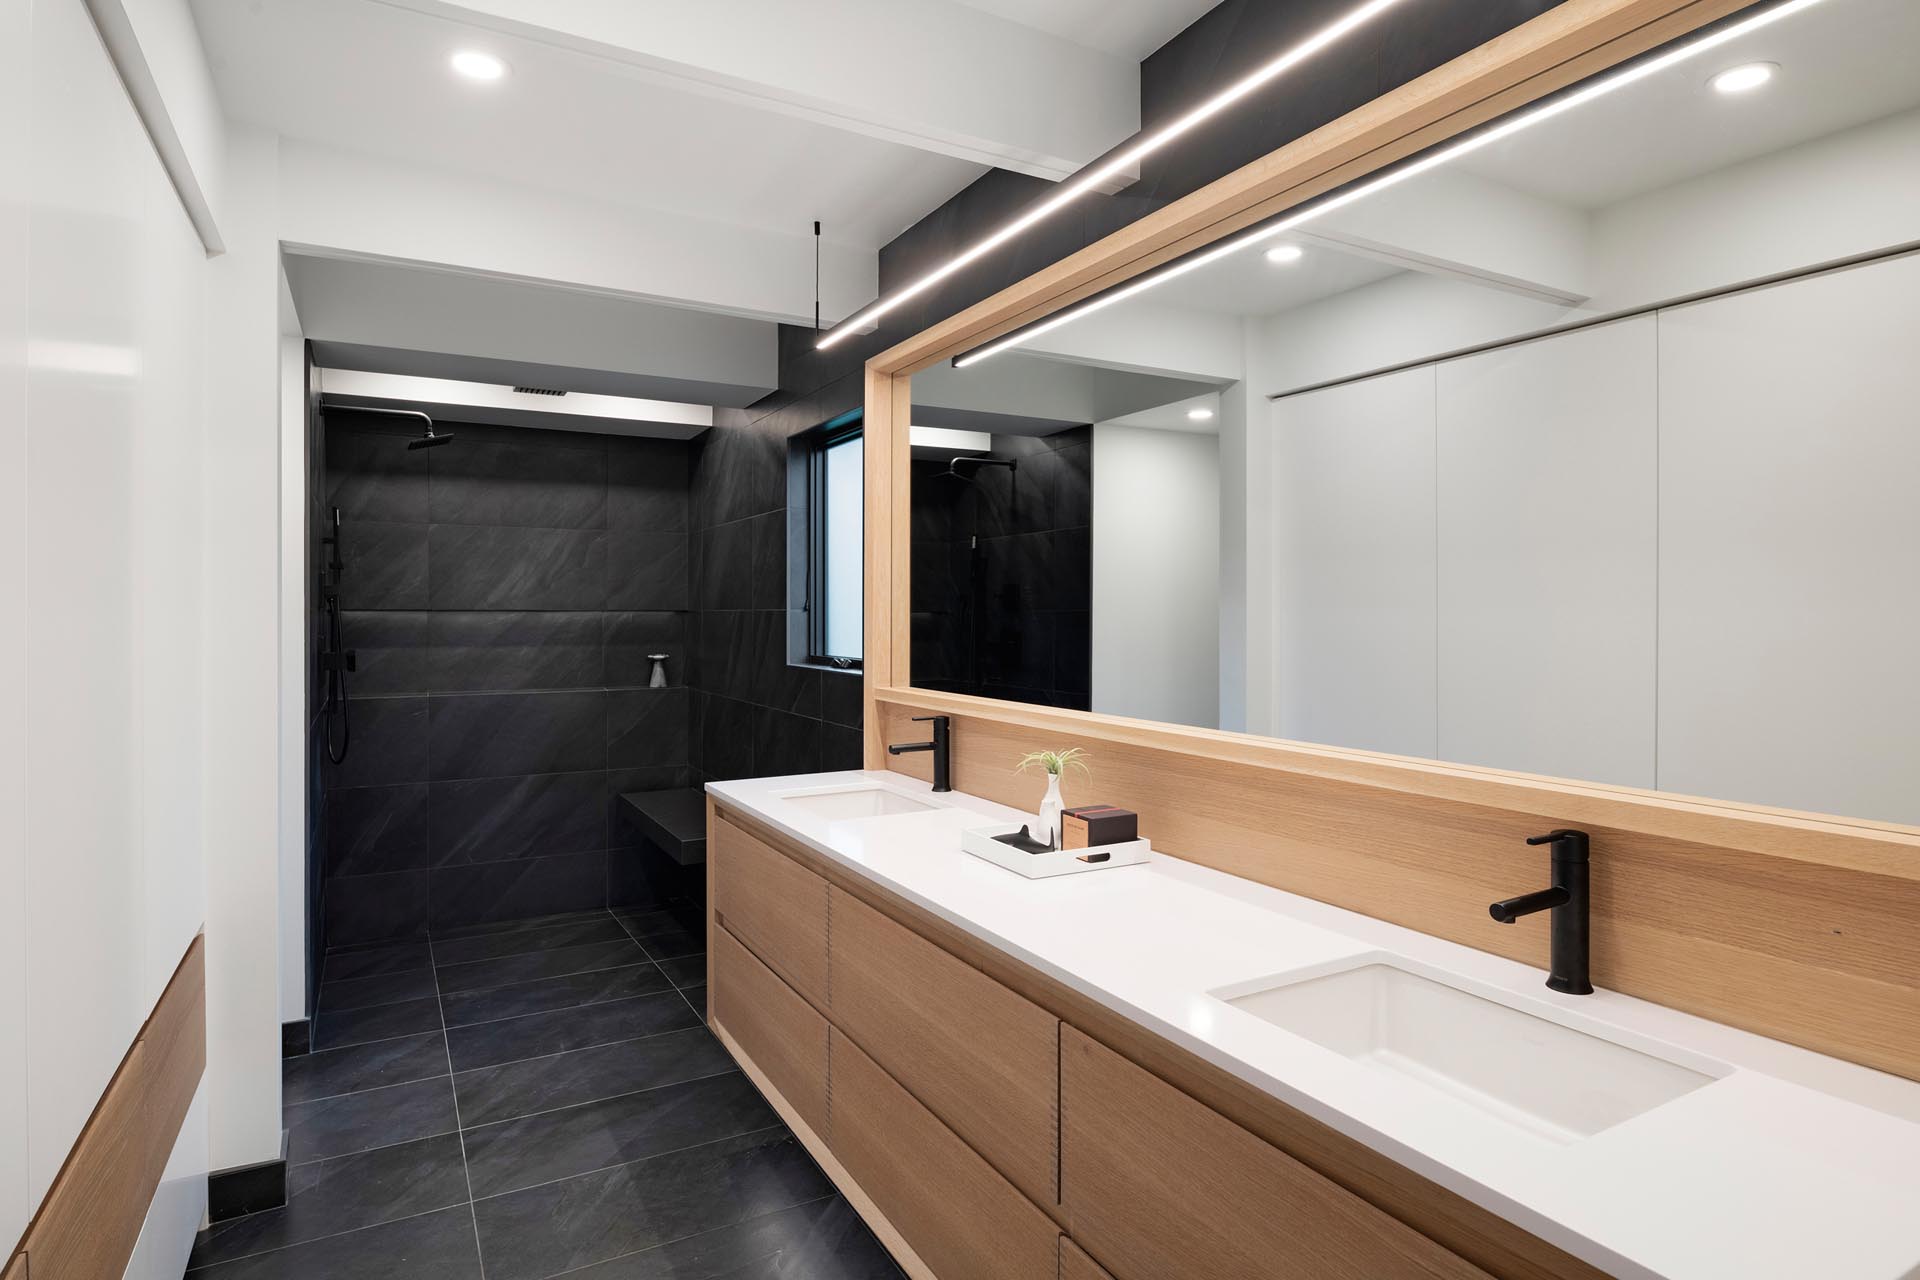 In this mdoern master bathroom, a long wood vanity is topped with a white counter and undermount sinks, while black tile has been used for flooring and the shower.